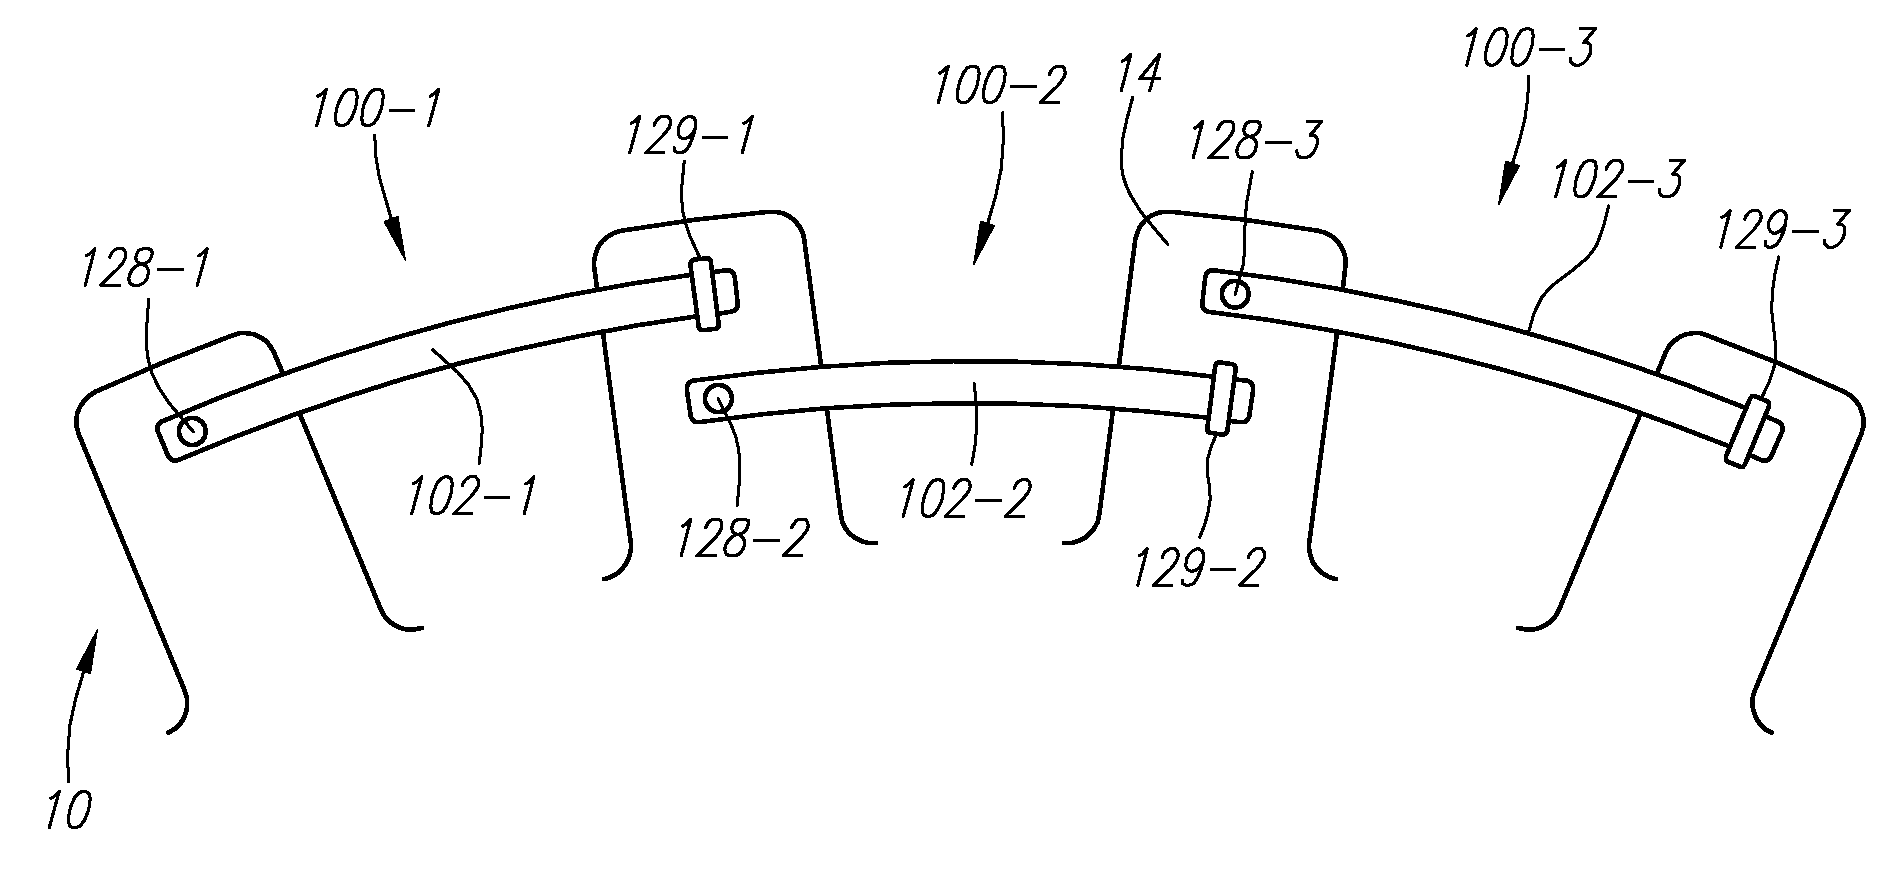 Systems, Methods And Devices For Correcting Spinal Deformities